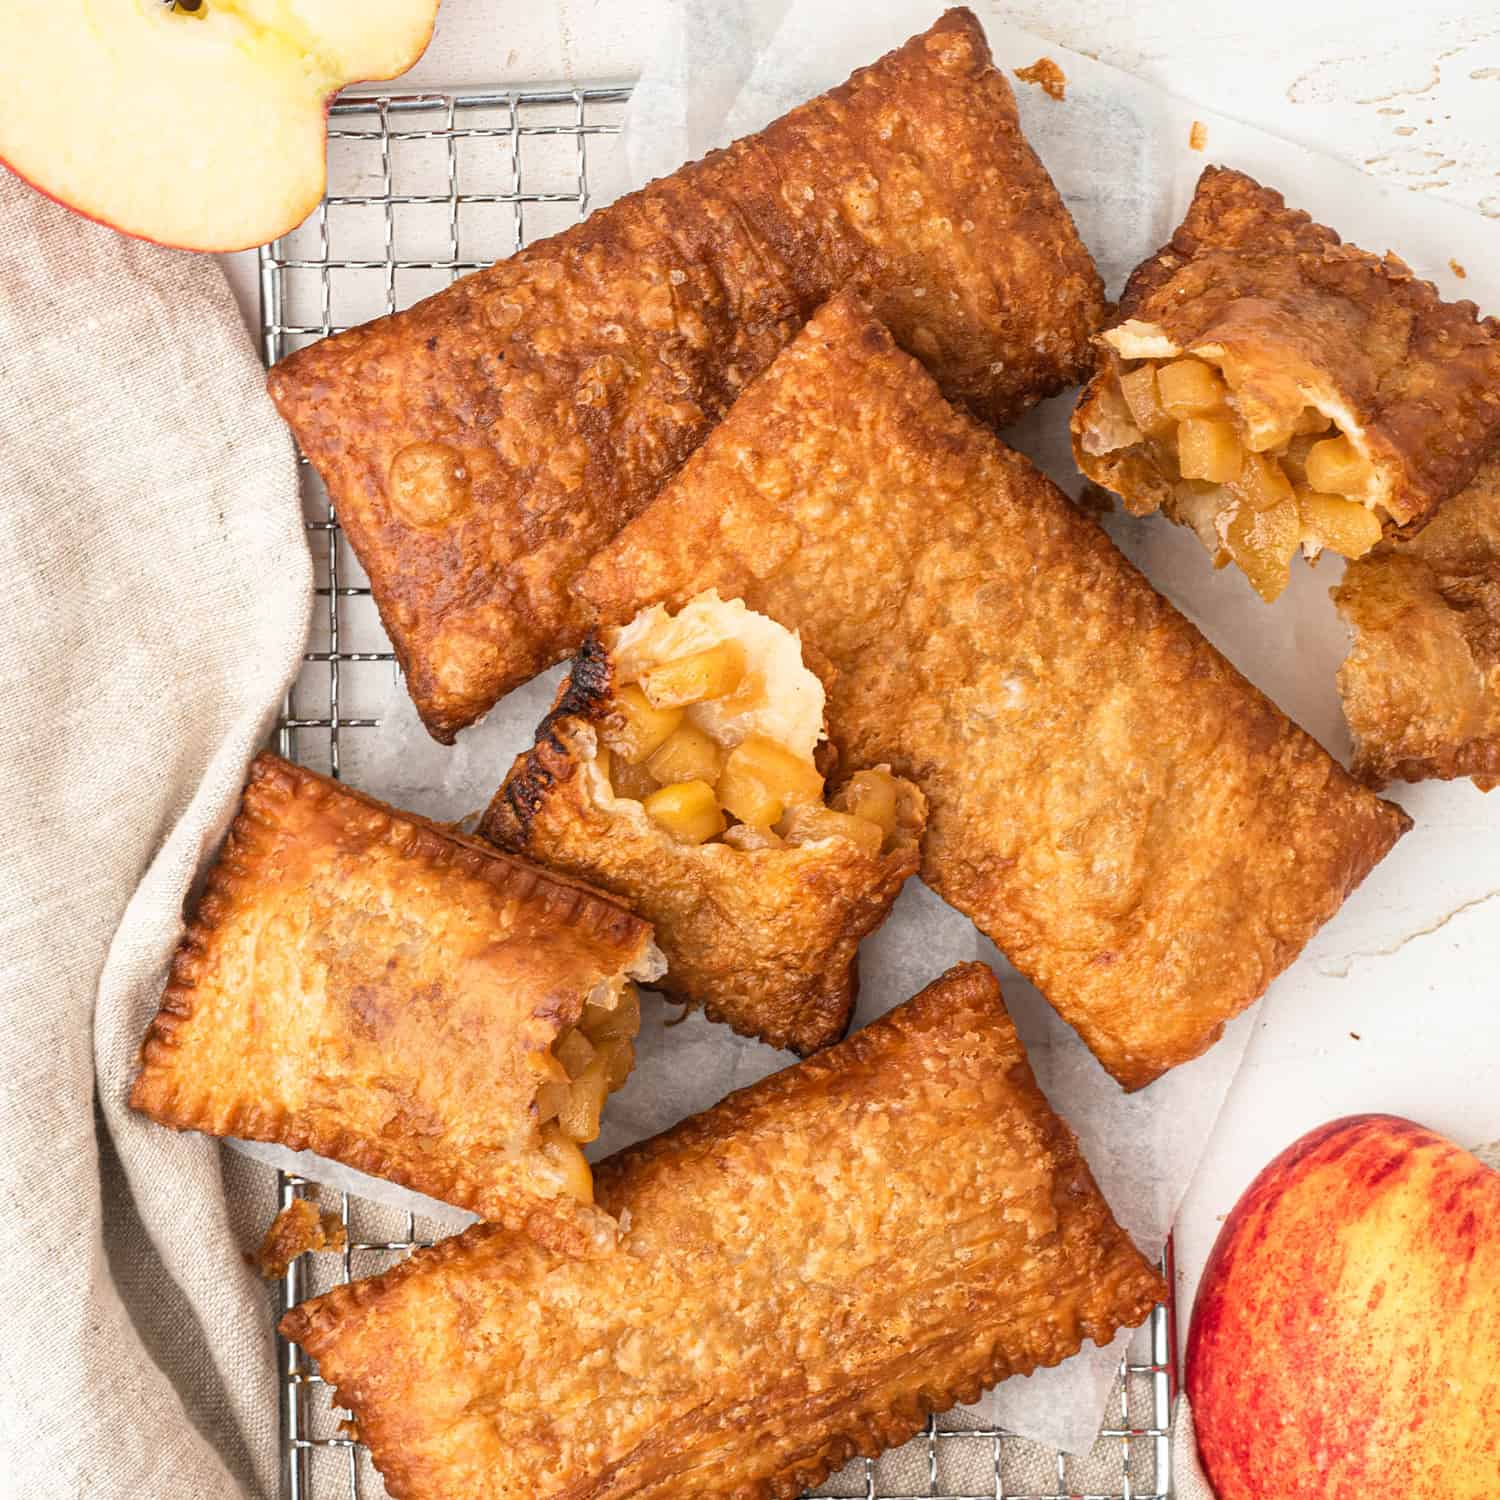 Golden fried puff pastry filled with warm cinnamon apples